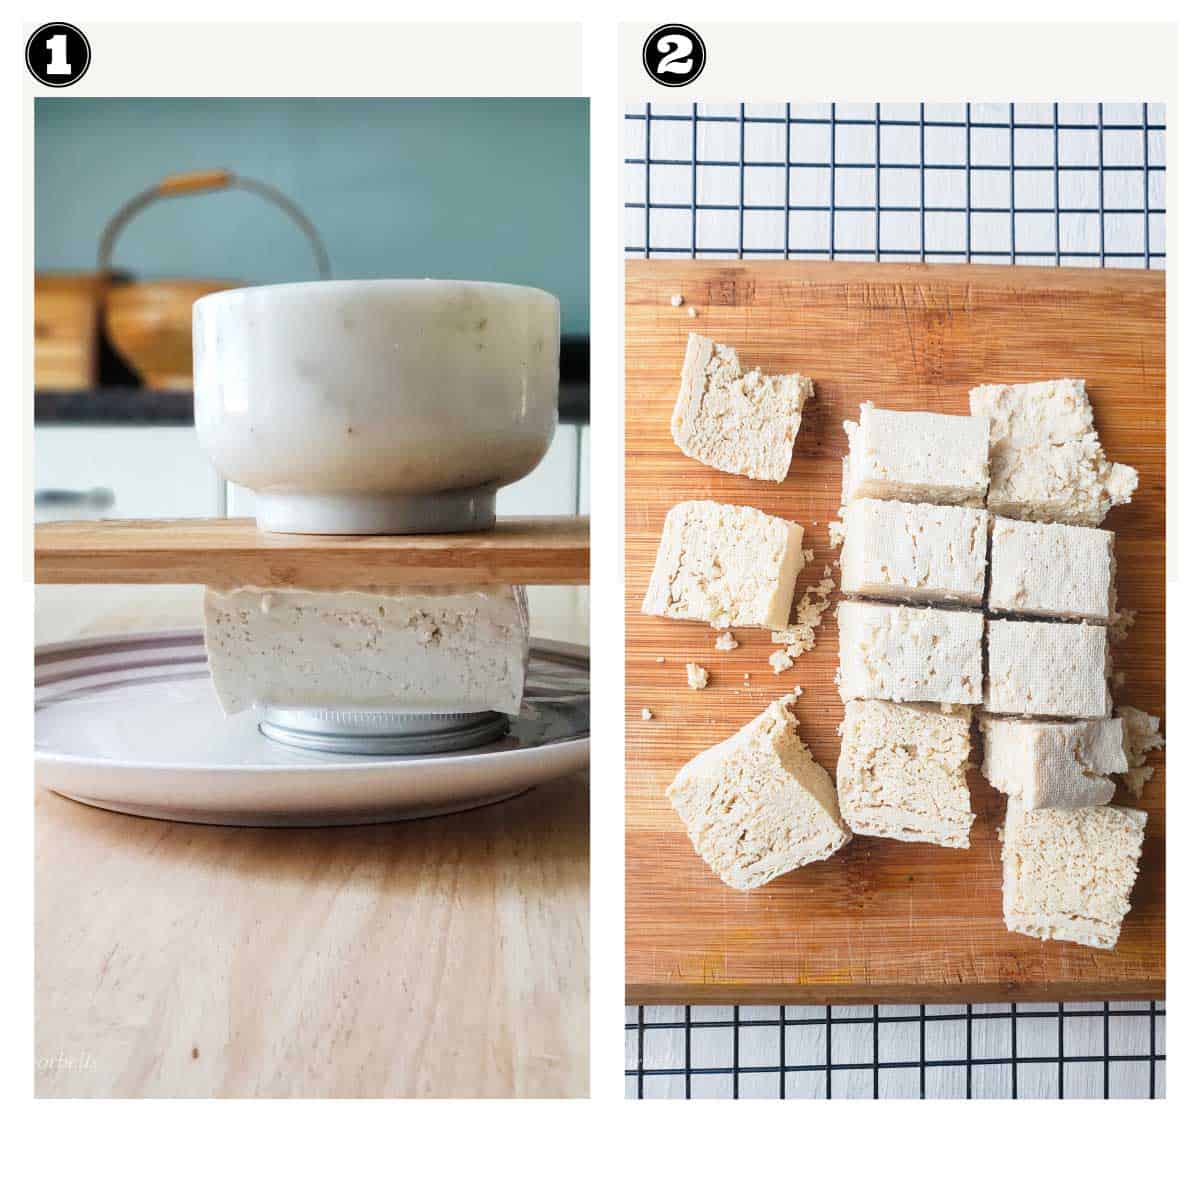 steps for pressing and freezing tofu